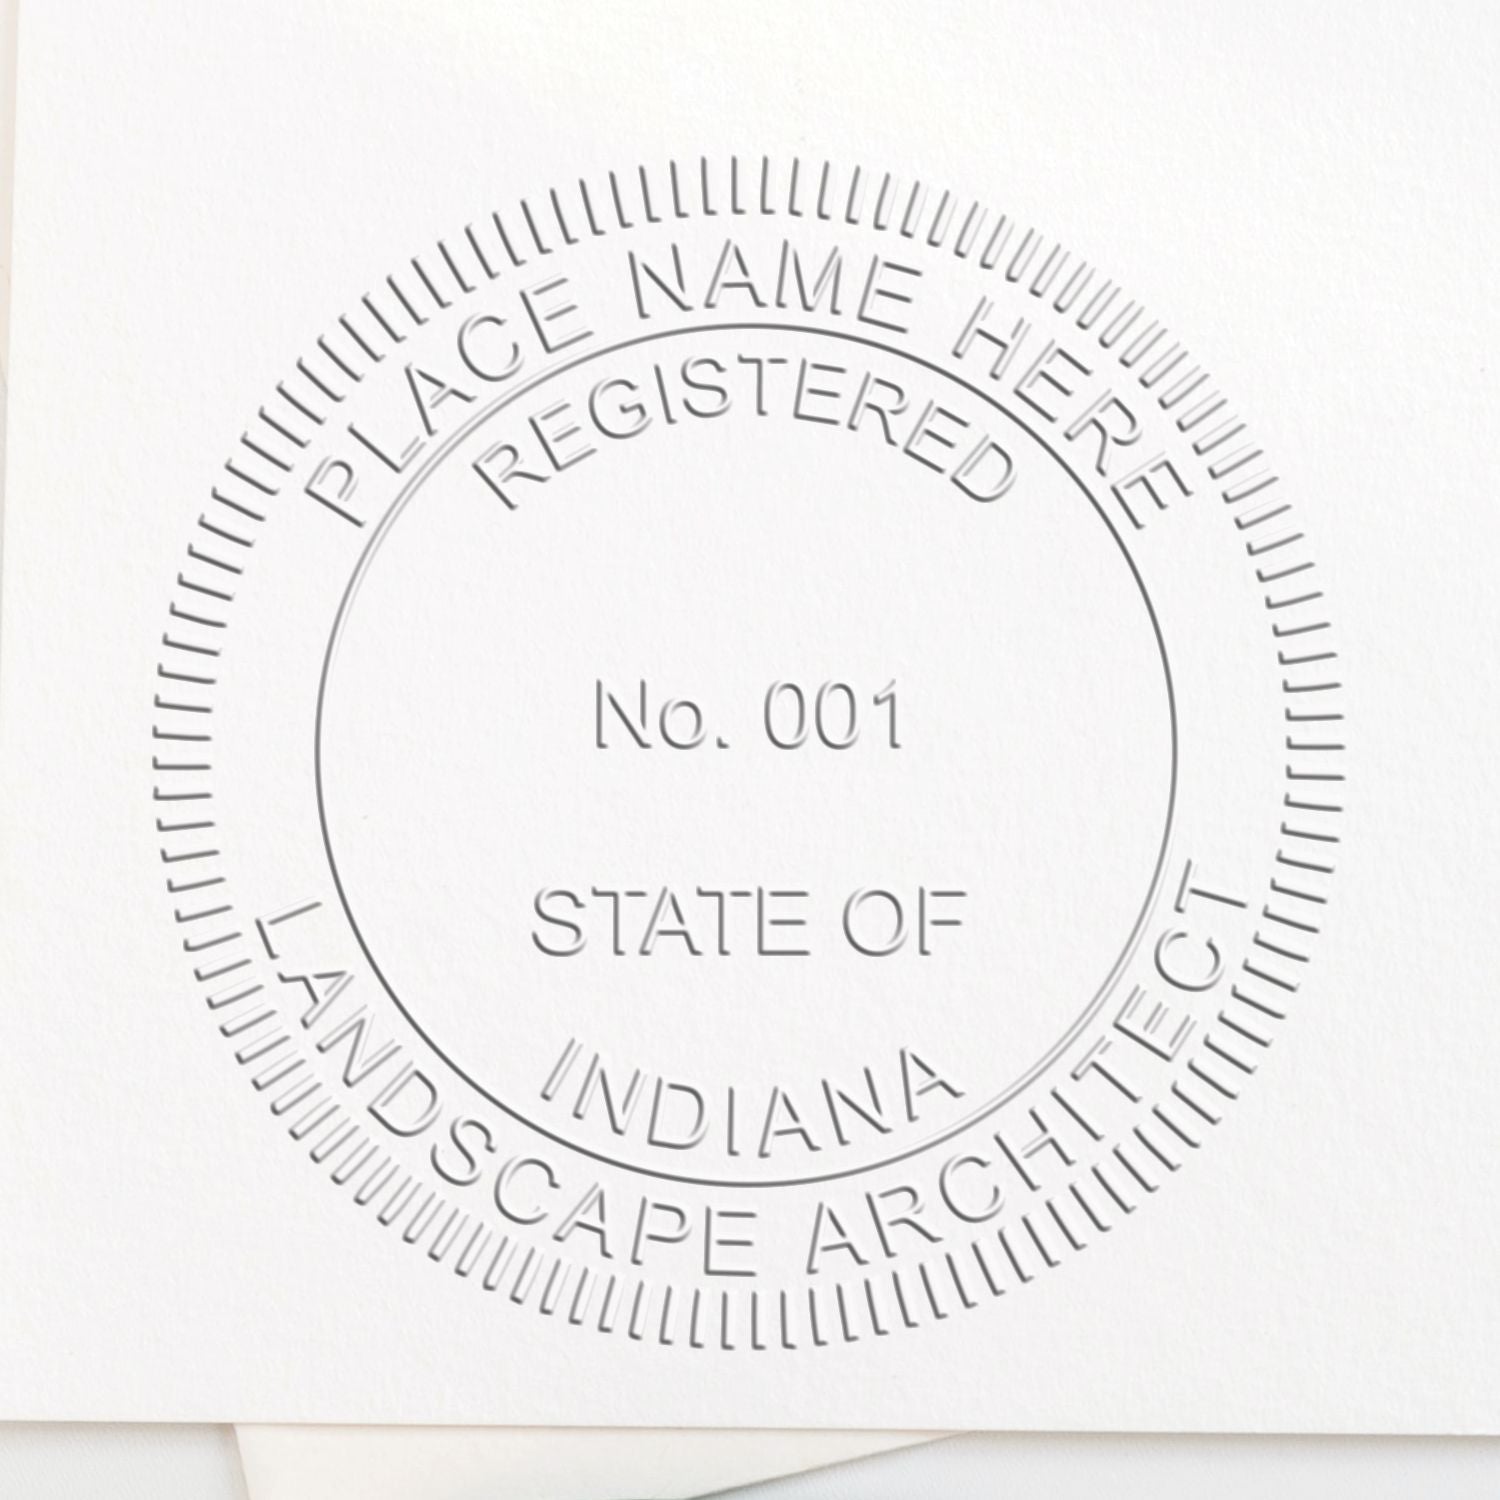 A stamped impression of the Soft Pocket Indiana Landscape Architect Embosser in this stylish lifestyle photo, setting the tone for a unique and personalized product.